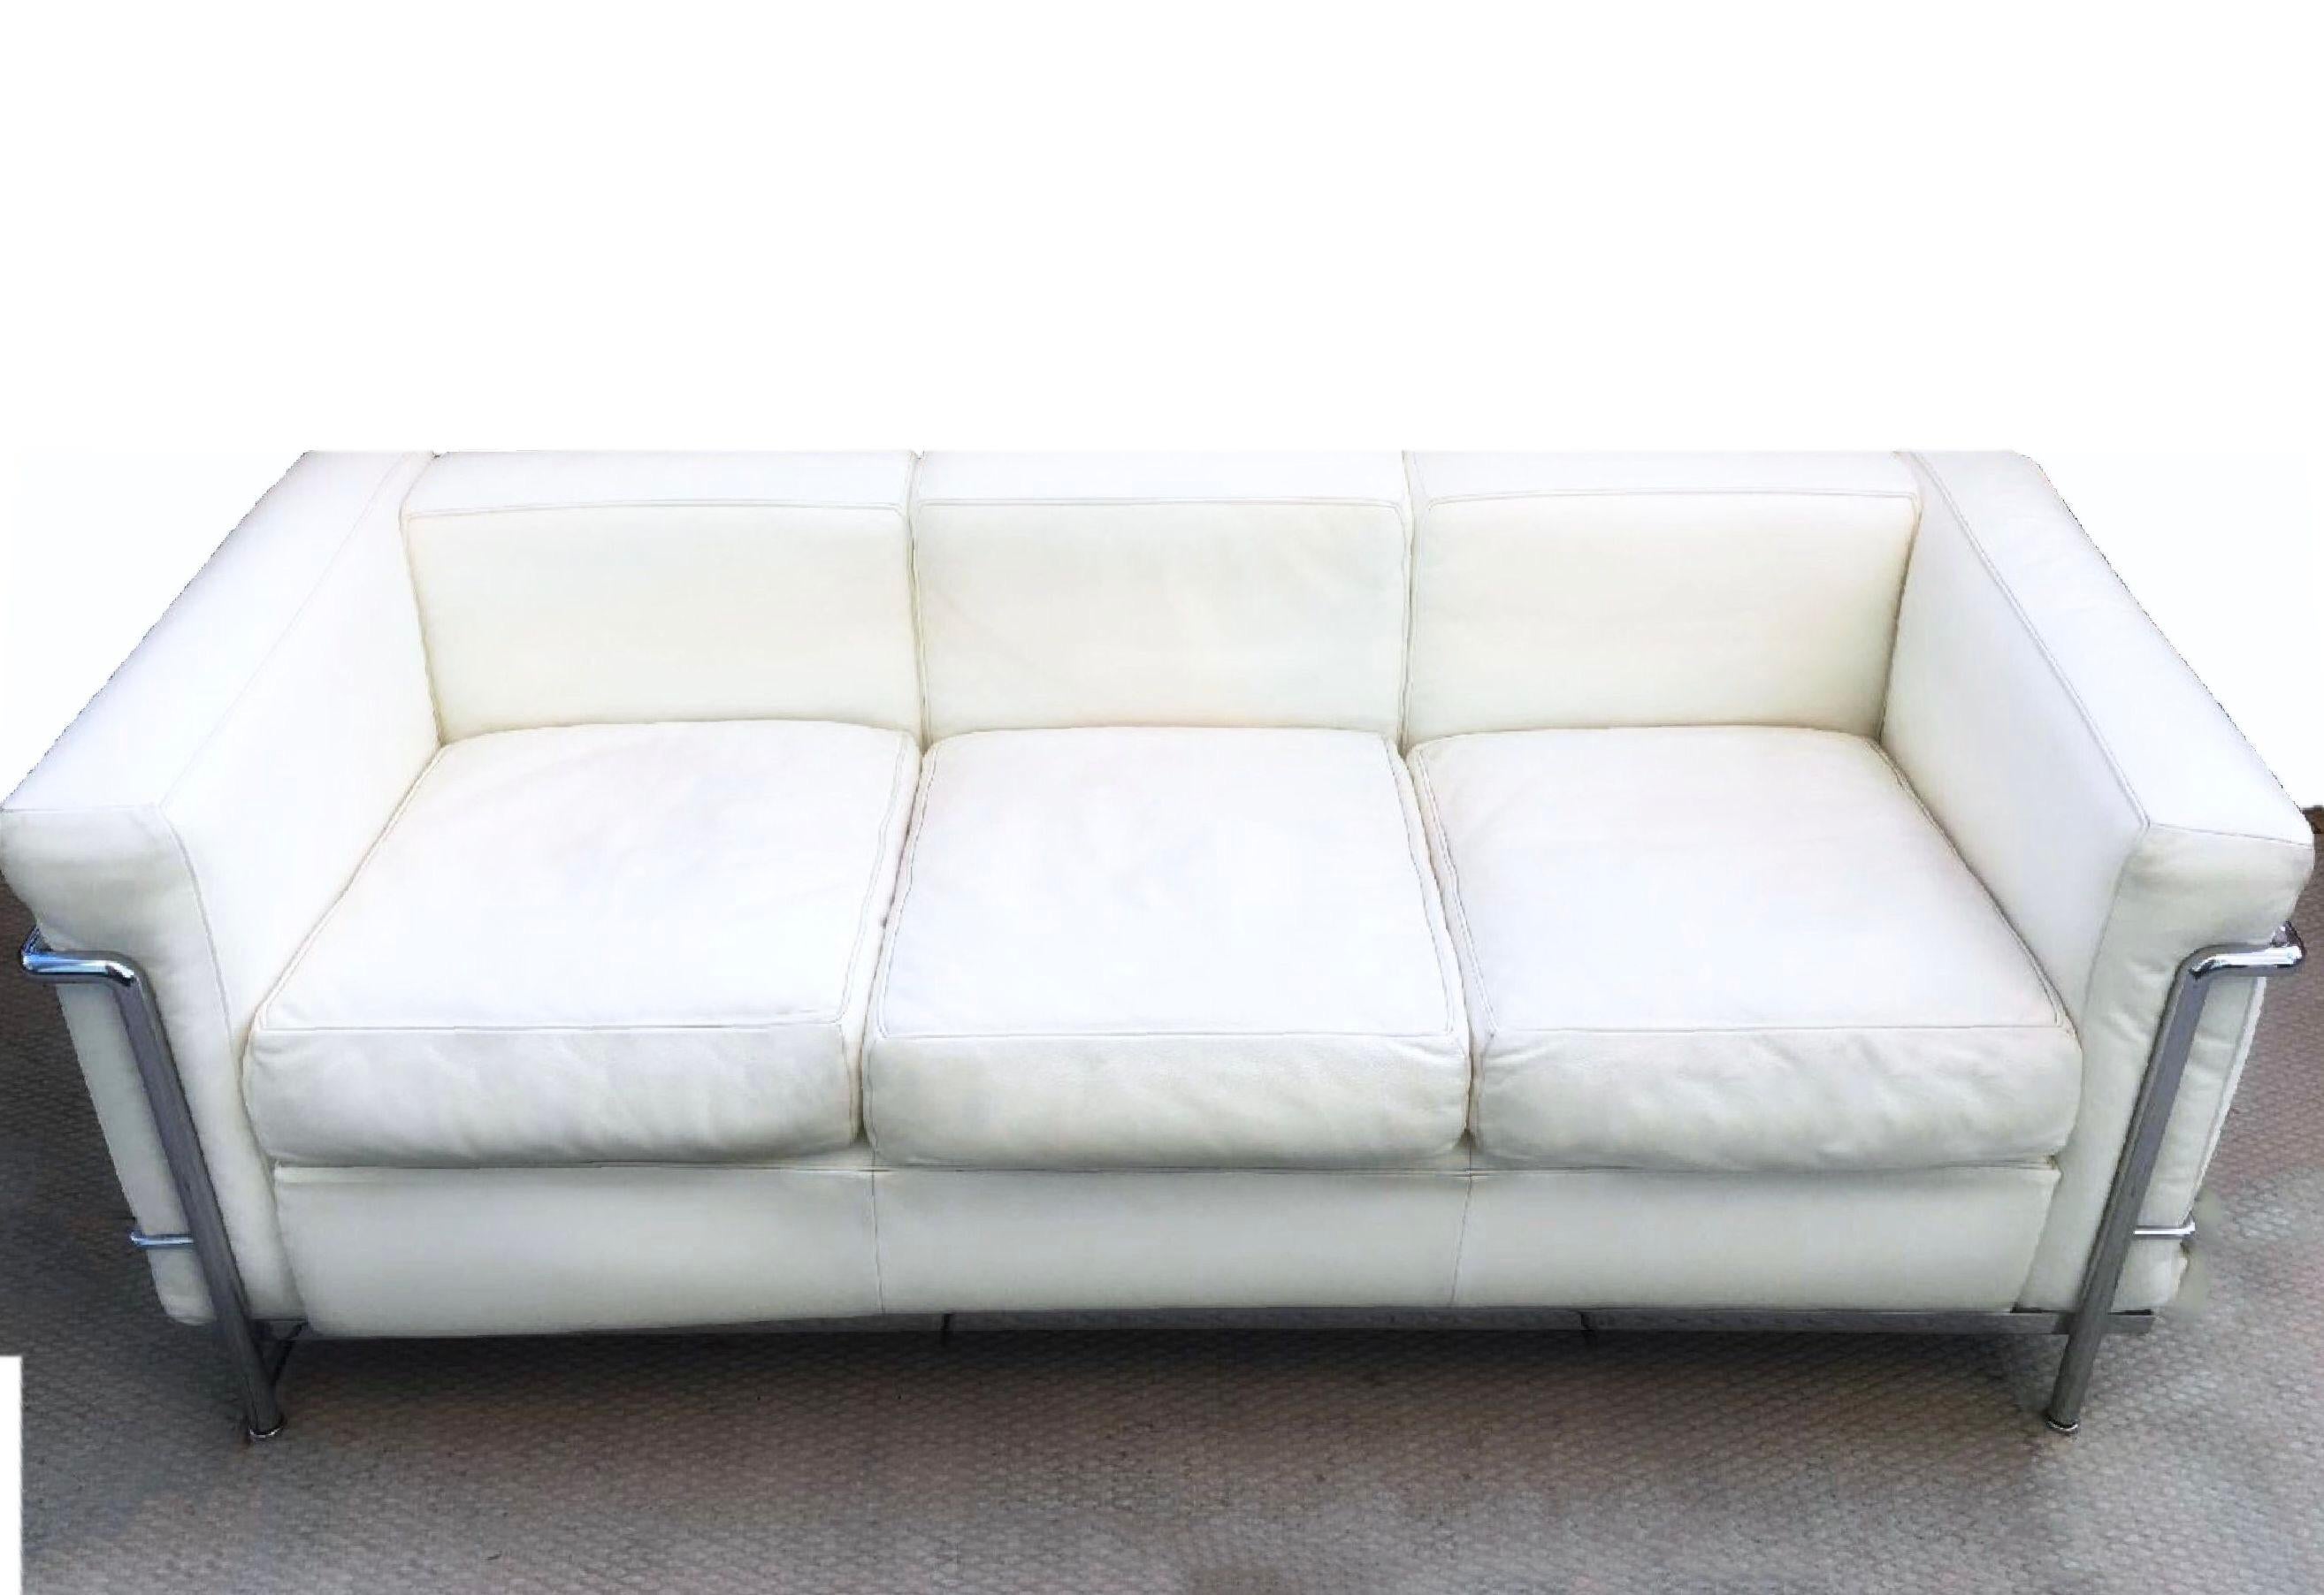 20th Century Le Corbusier LC2 Three-Seat Sofa in Ivory Leather, Chrome, Cassina, Minimalism